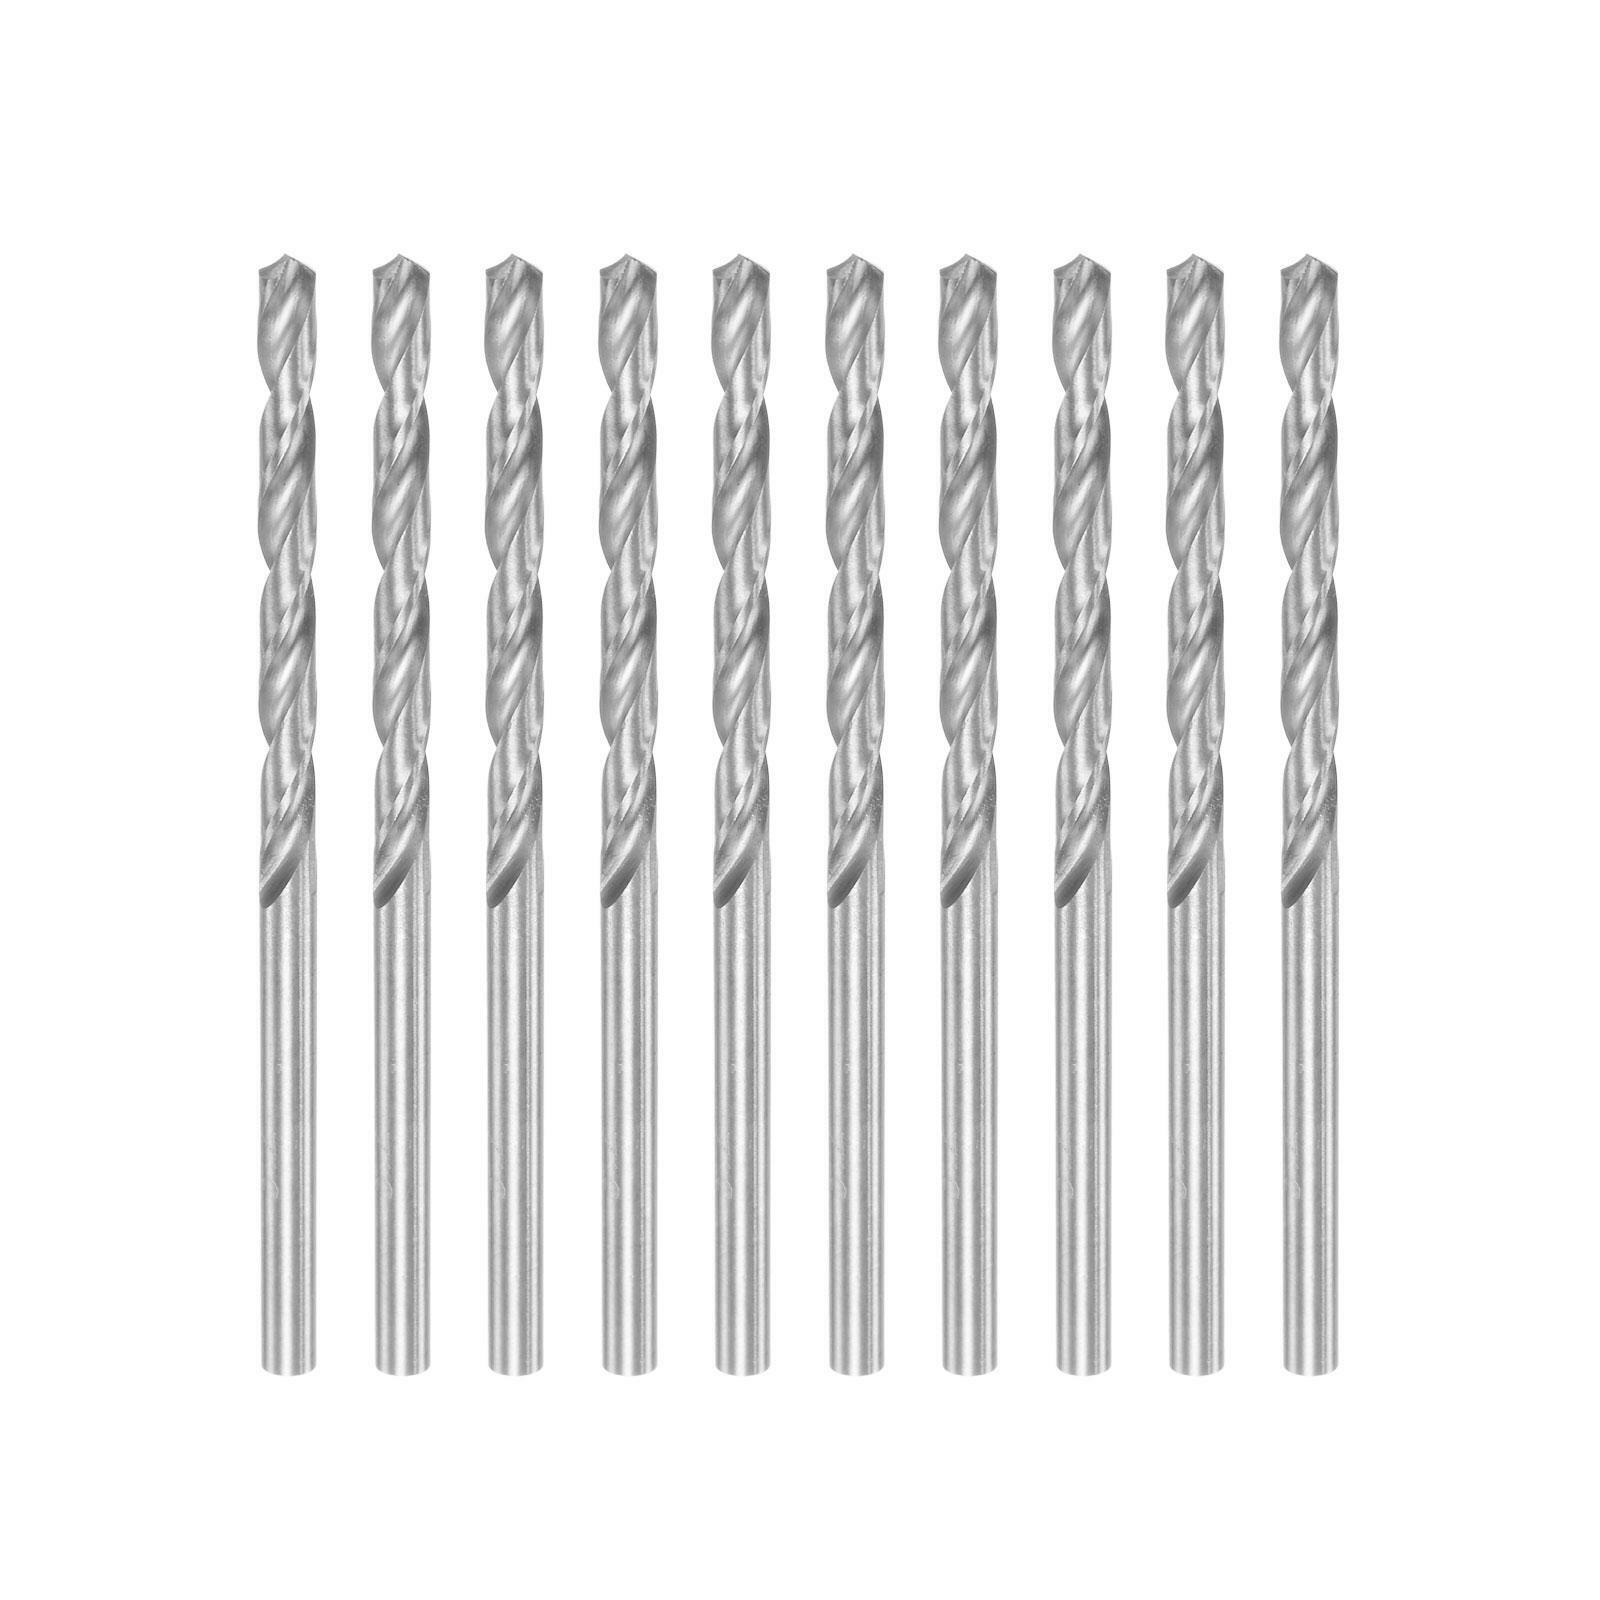 10 Piece - HSS Drill Bits - 3.2mm - South East Clearance Centre